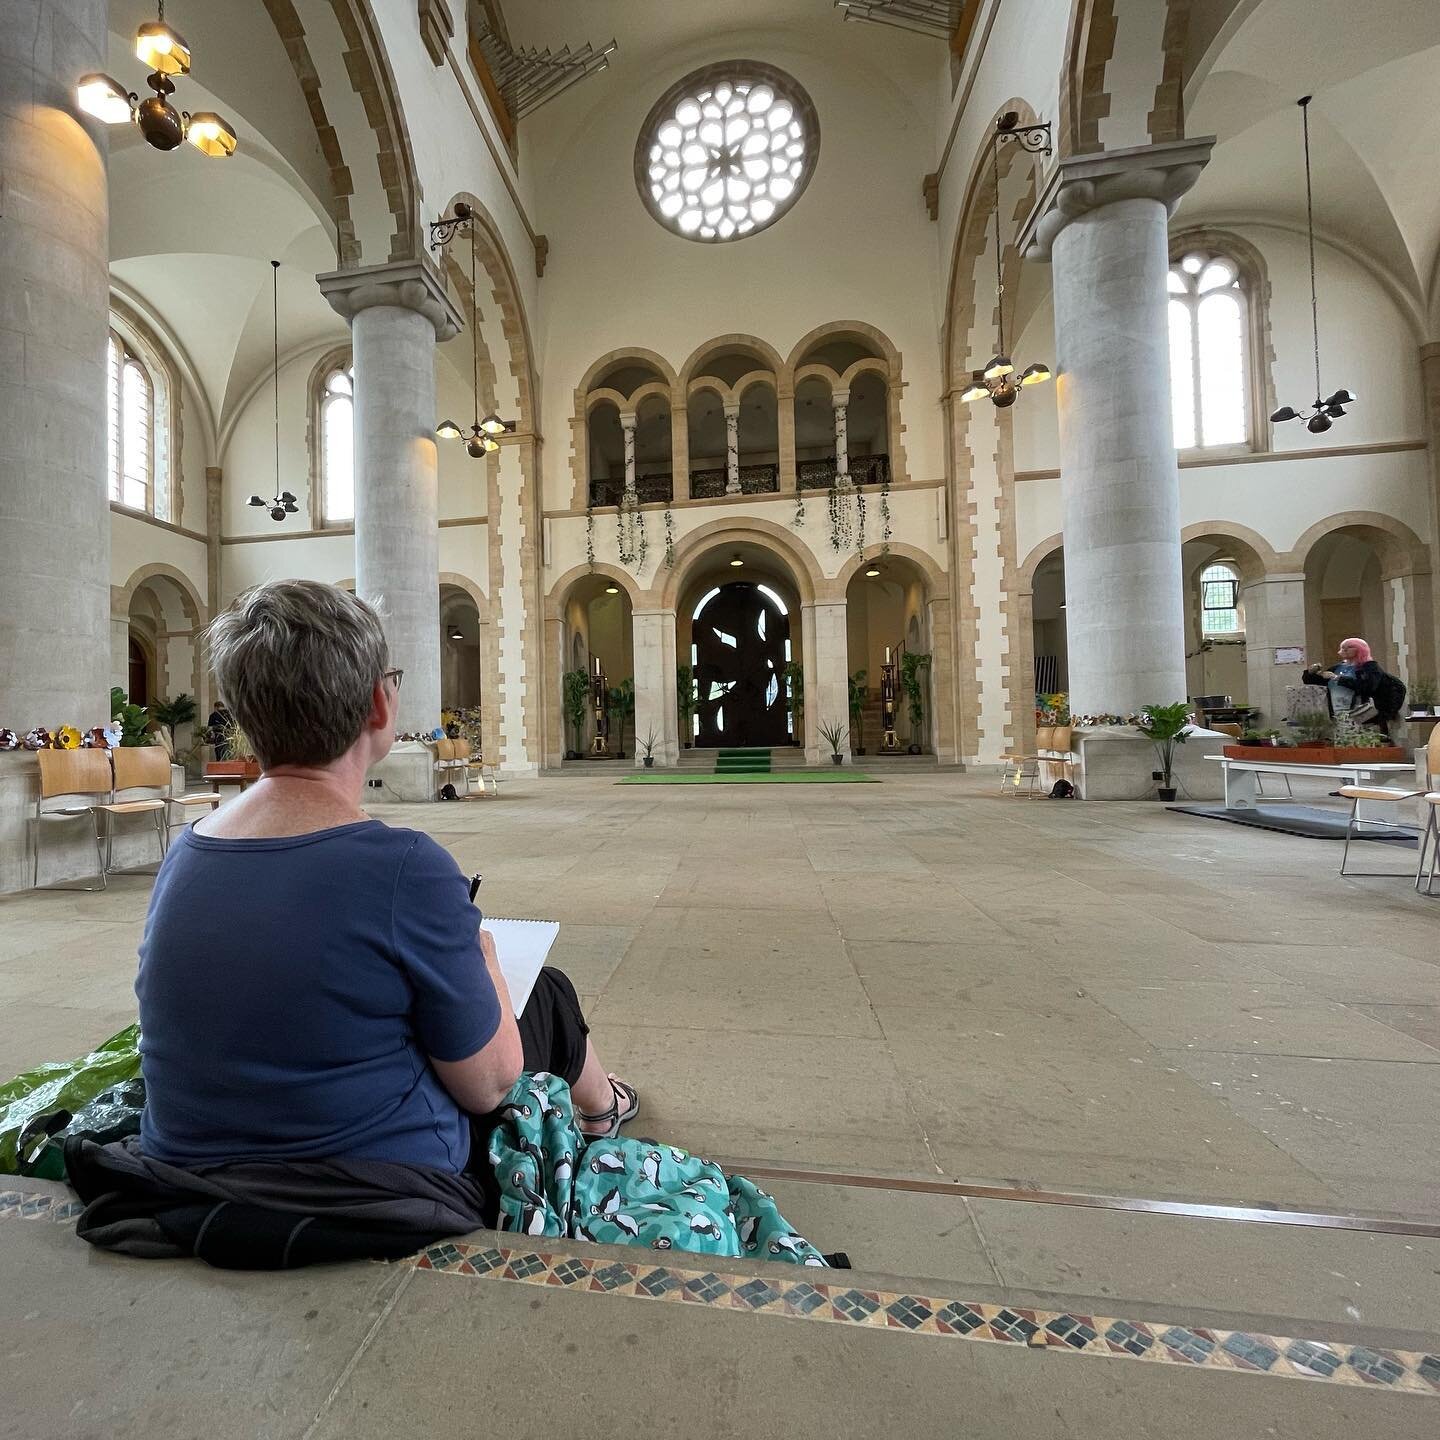 We are pleased to be joined by the @uskportsmouth today at #TheWildCathedral who are taking inspiration from the sensory garden and our magnificent architecture. 

You can pop down yourself and explore daily until the 3 September, or join us this Fri